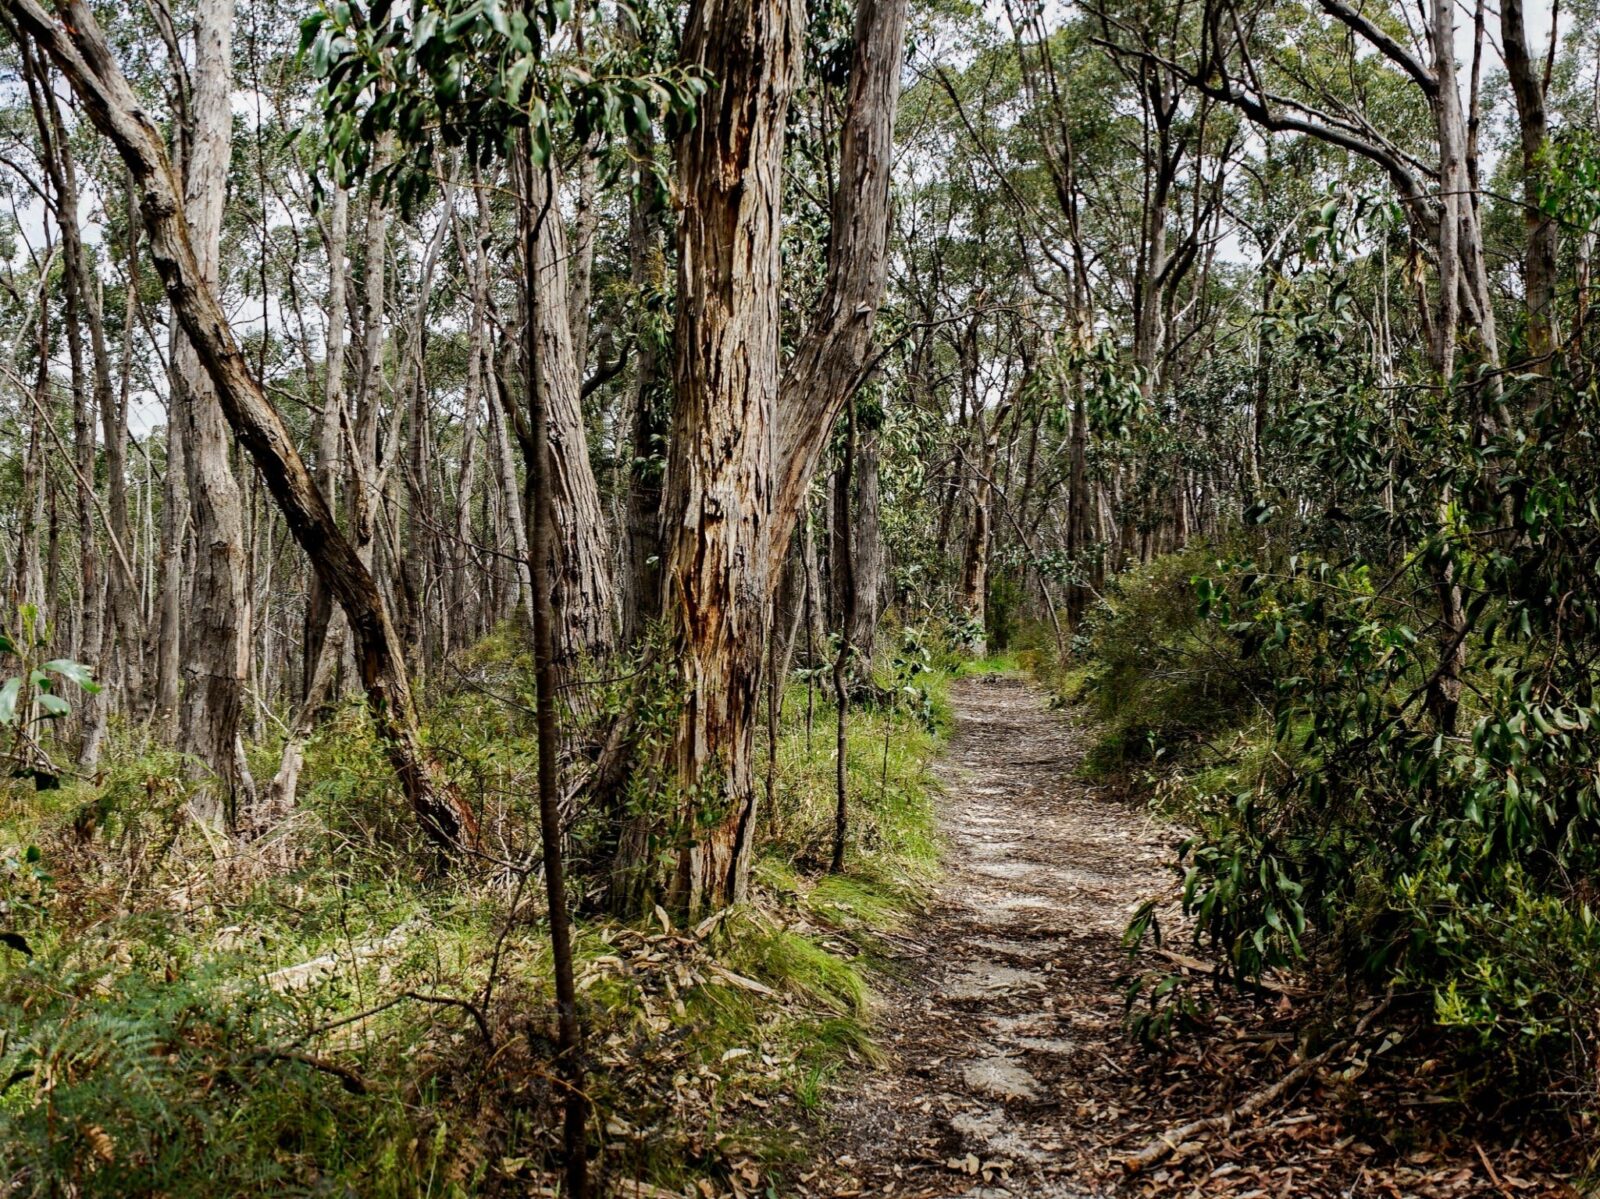 A section of the Heysen Trail runs through Mylor Conservation Park